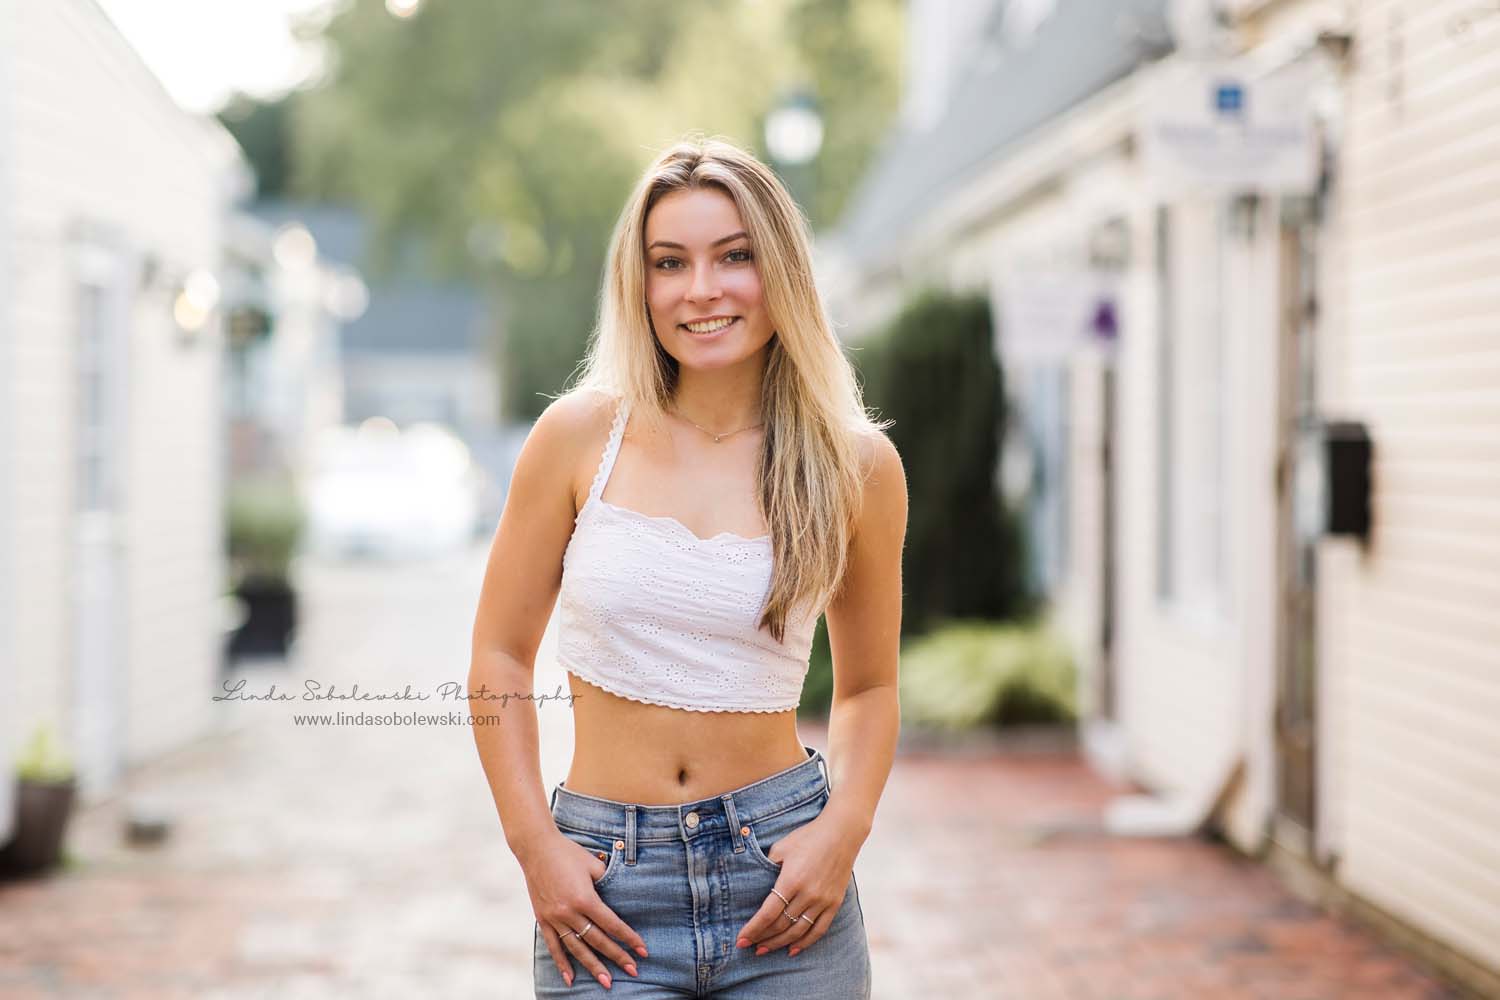 girl standing with her hands in her jean pockets, Urban Senior Photography session